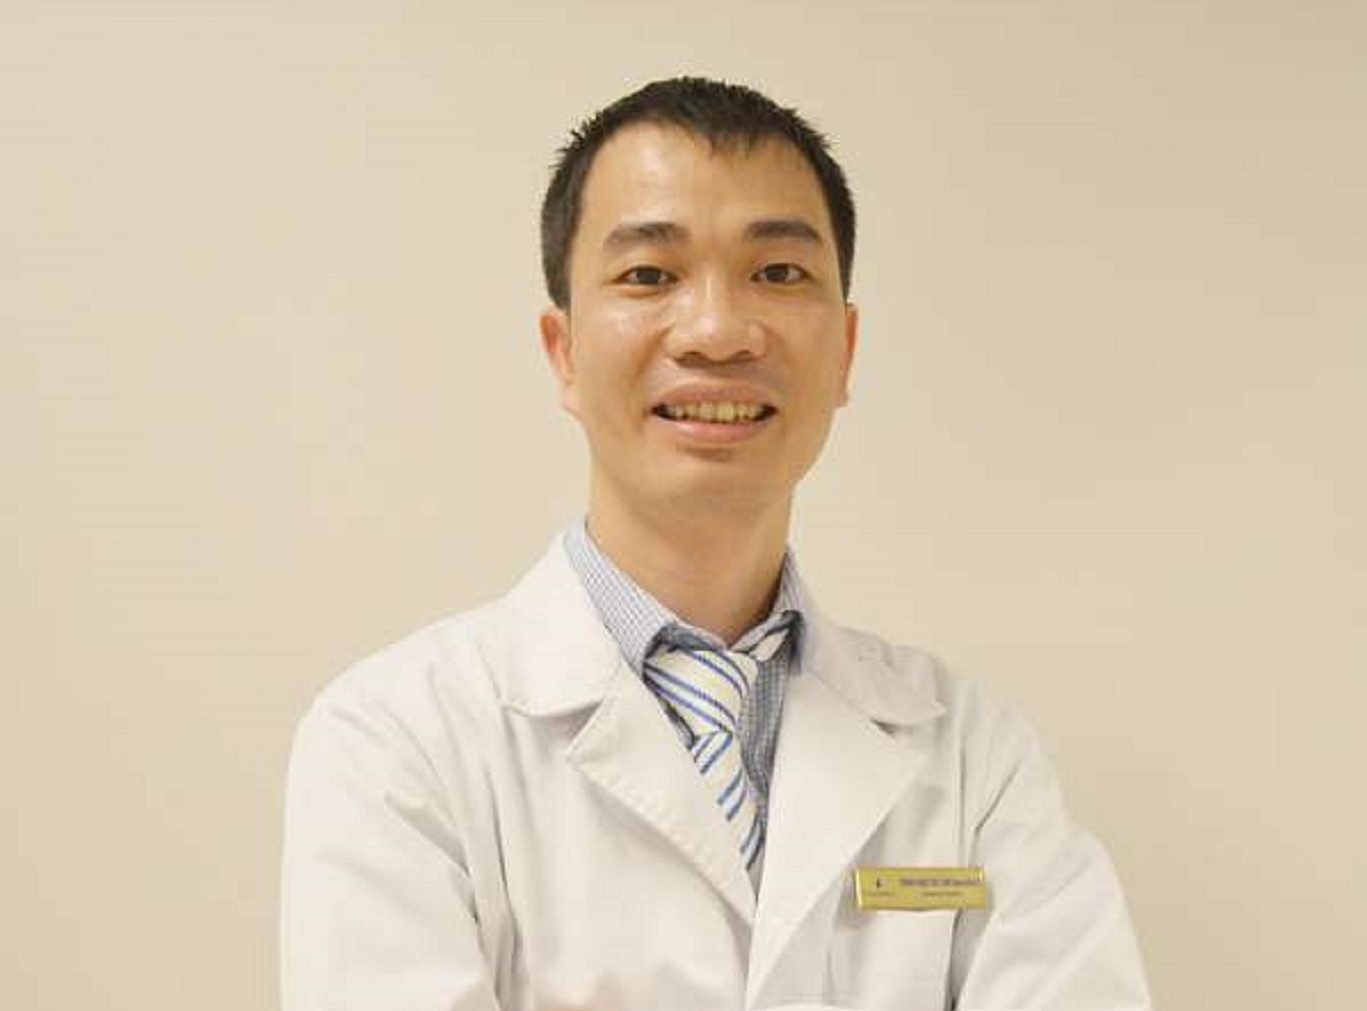 Trinh Ngoc Duy, MD., Specialist Level 2